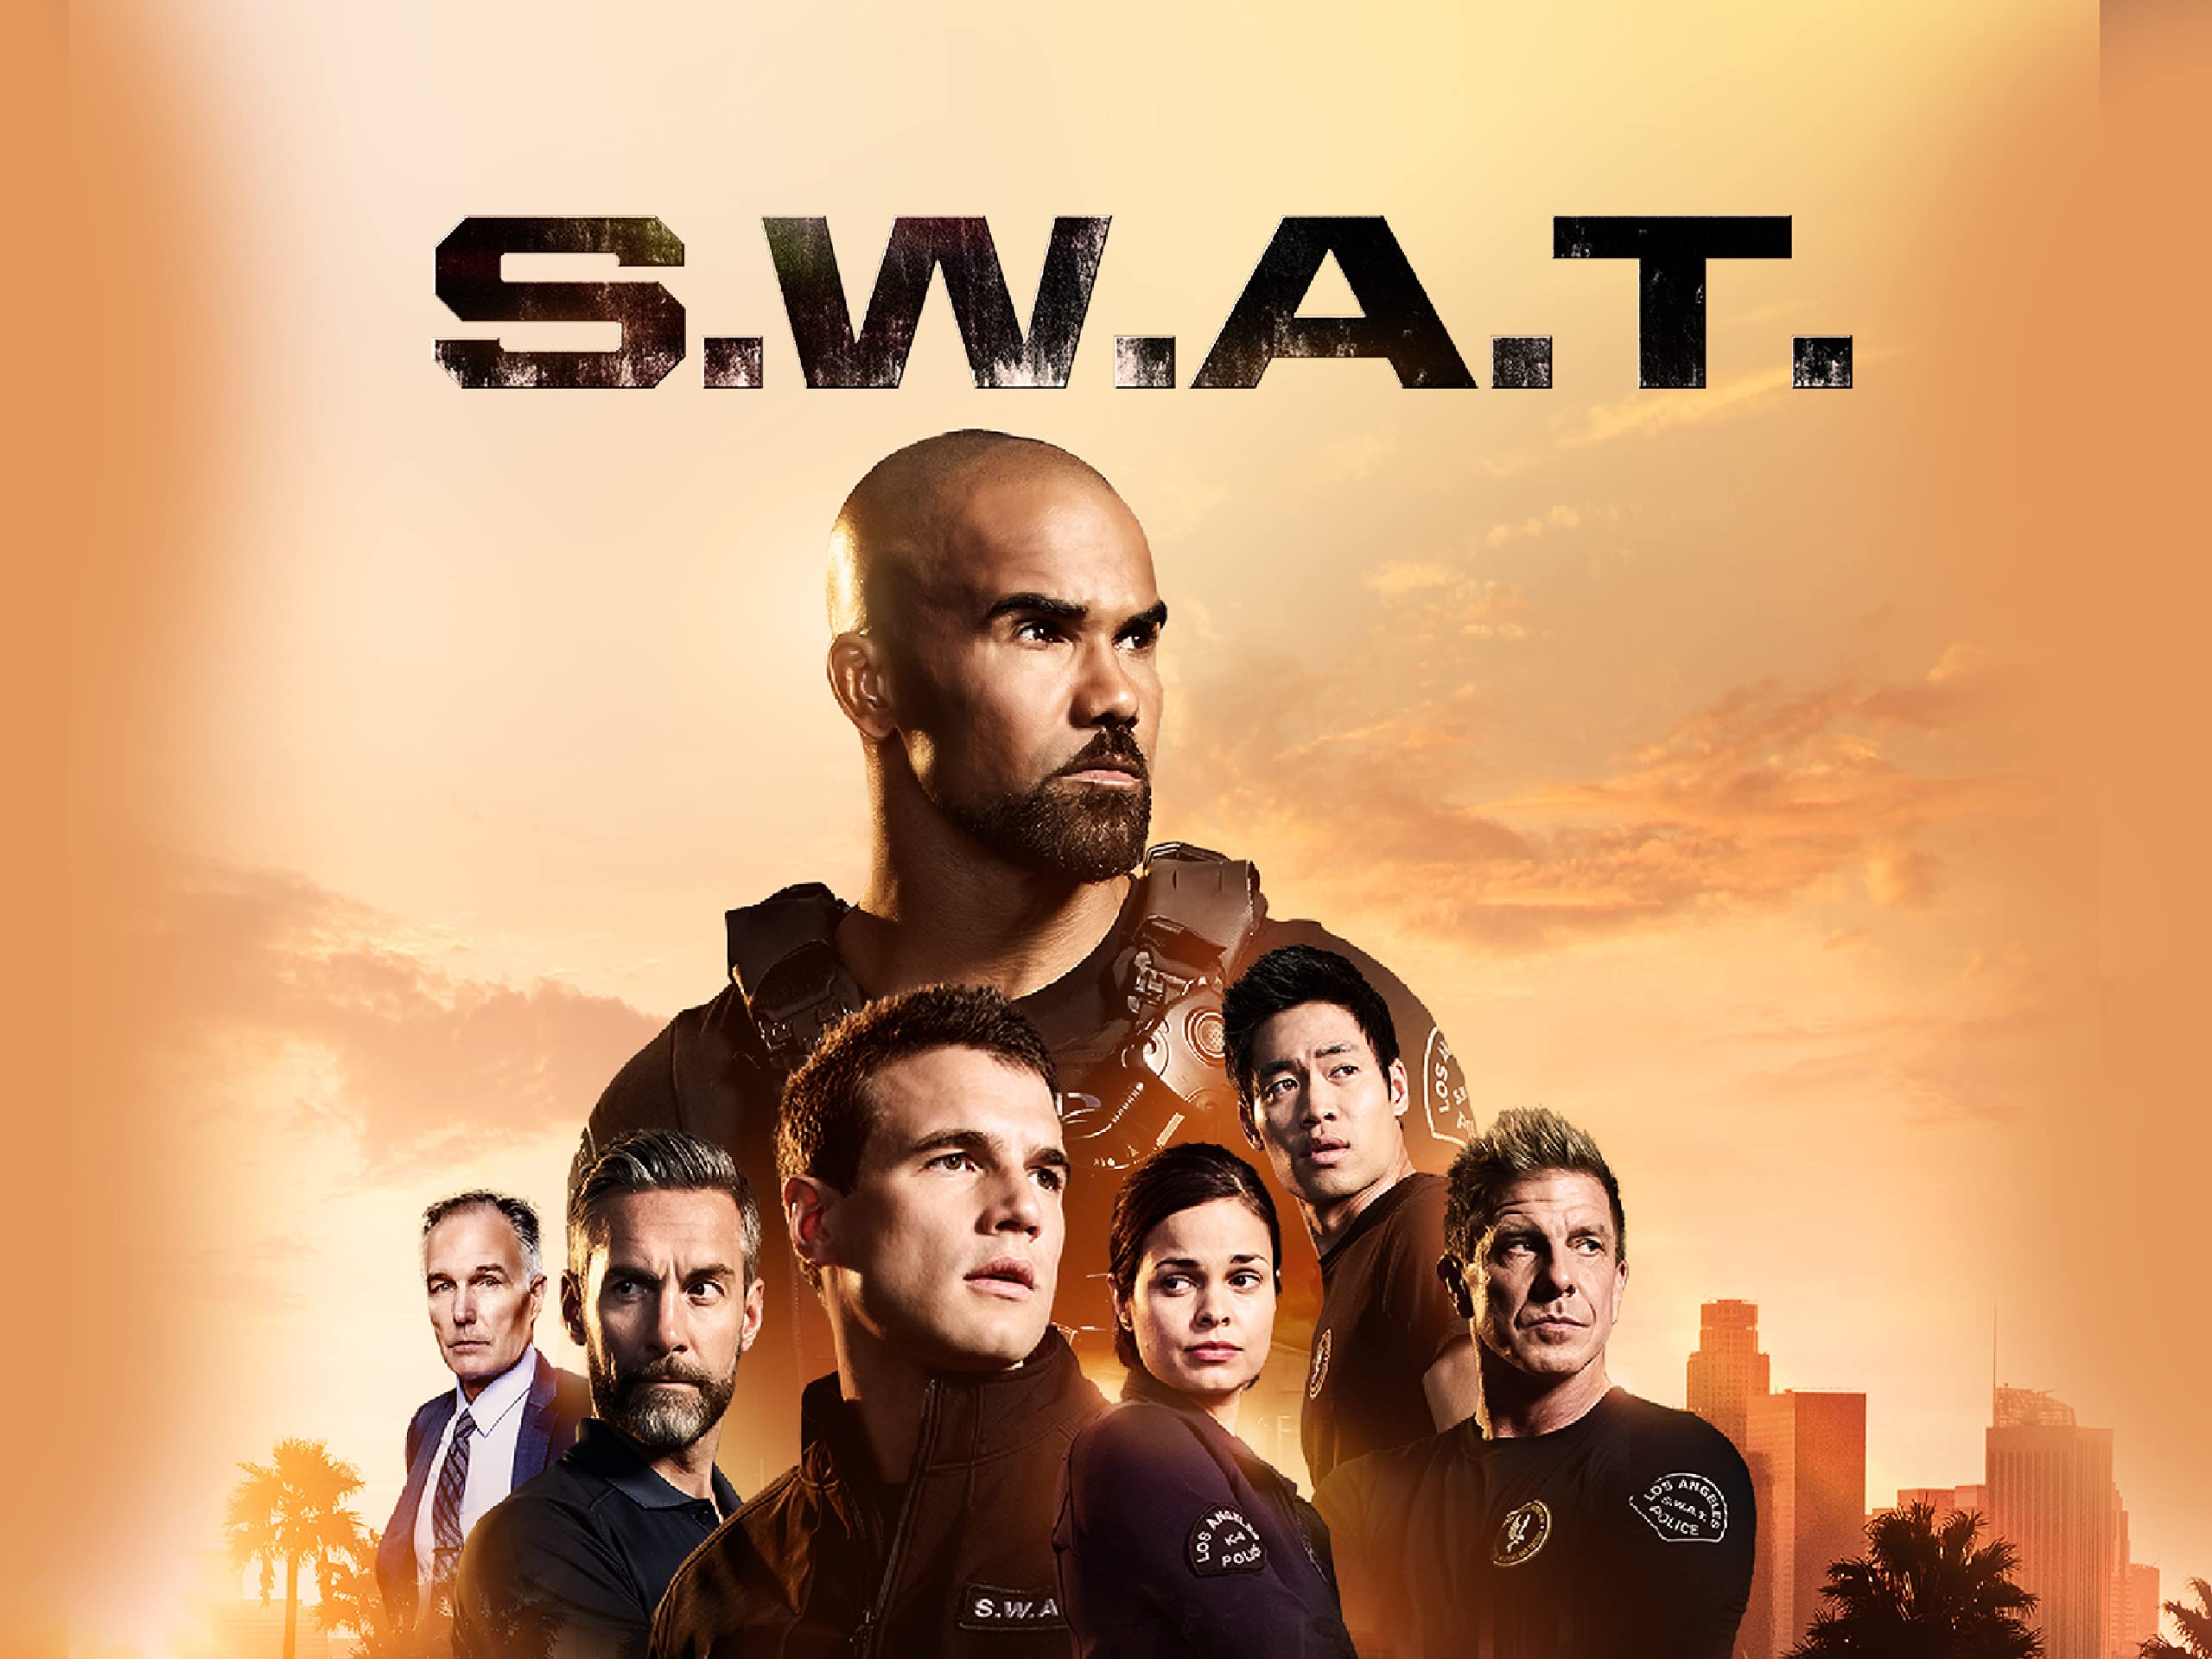 S.W.A.T. Season 5 Episode 7 Release Date, Storyline, And Recaps